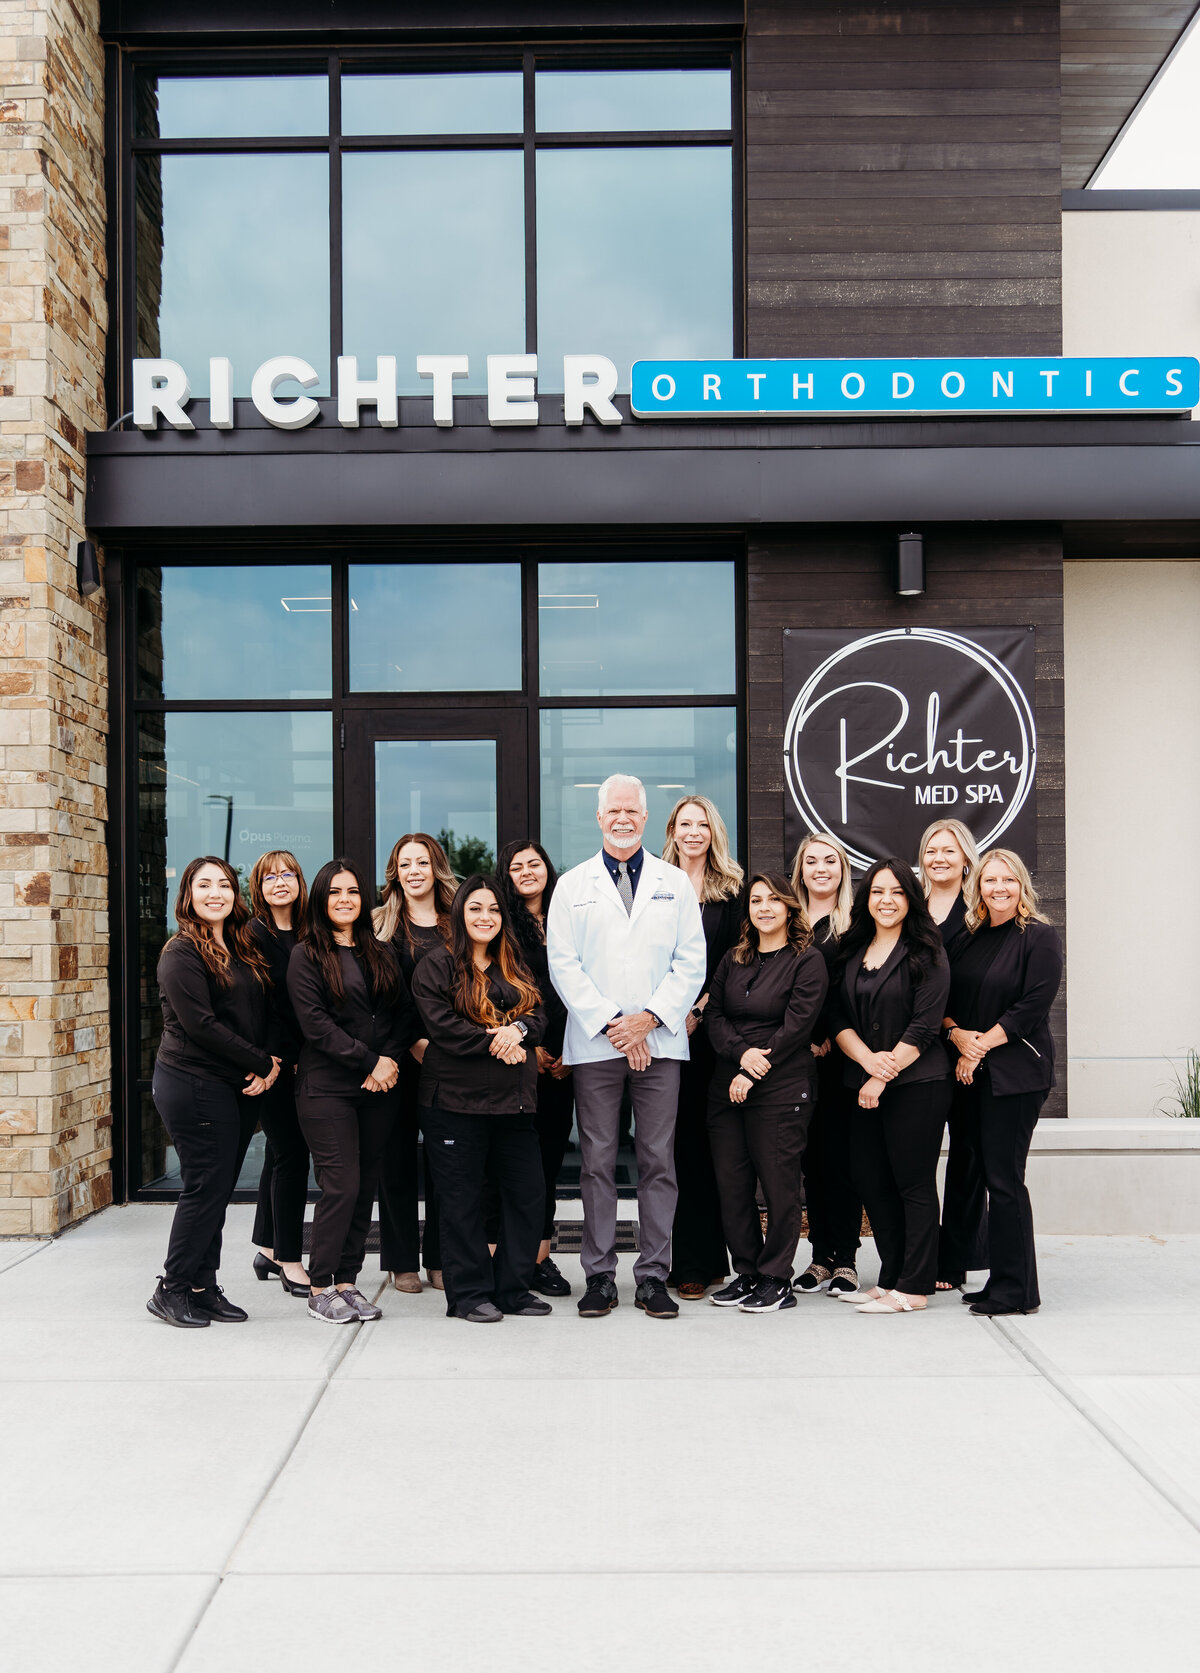 business branding in northern colorado, restuarant photography, team photos